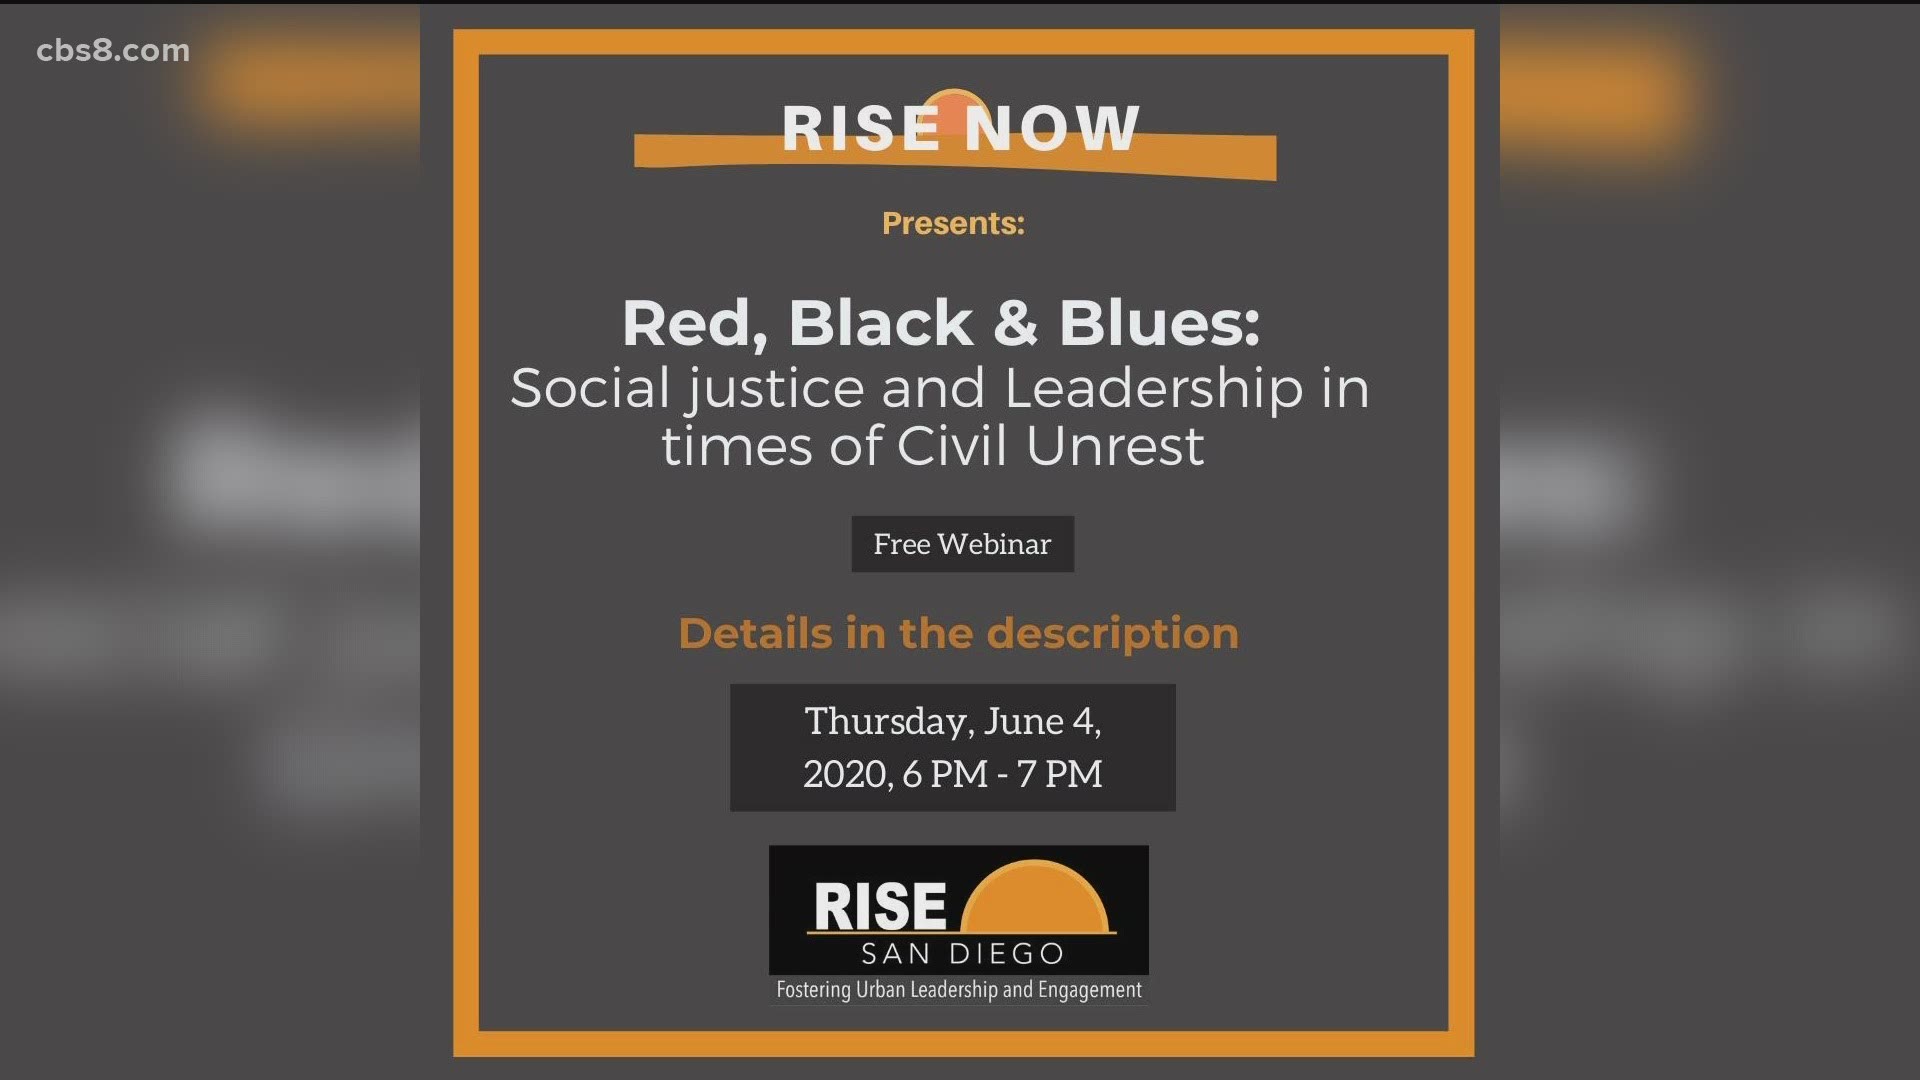 Co-founder of Rise San Diego, Tony Young talked about what is going on across the country and how Thursday's event can help mold leaders to keep the convo going.